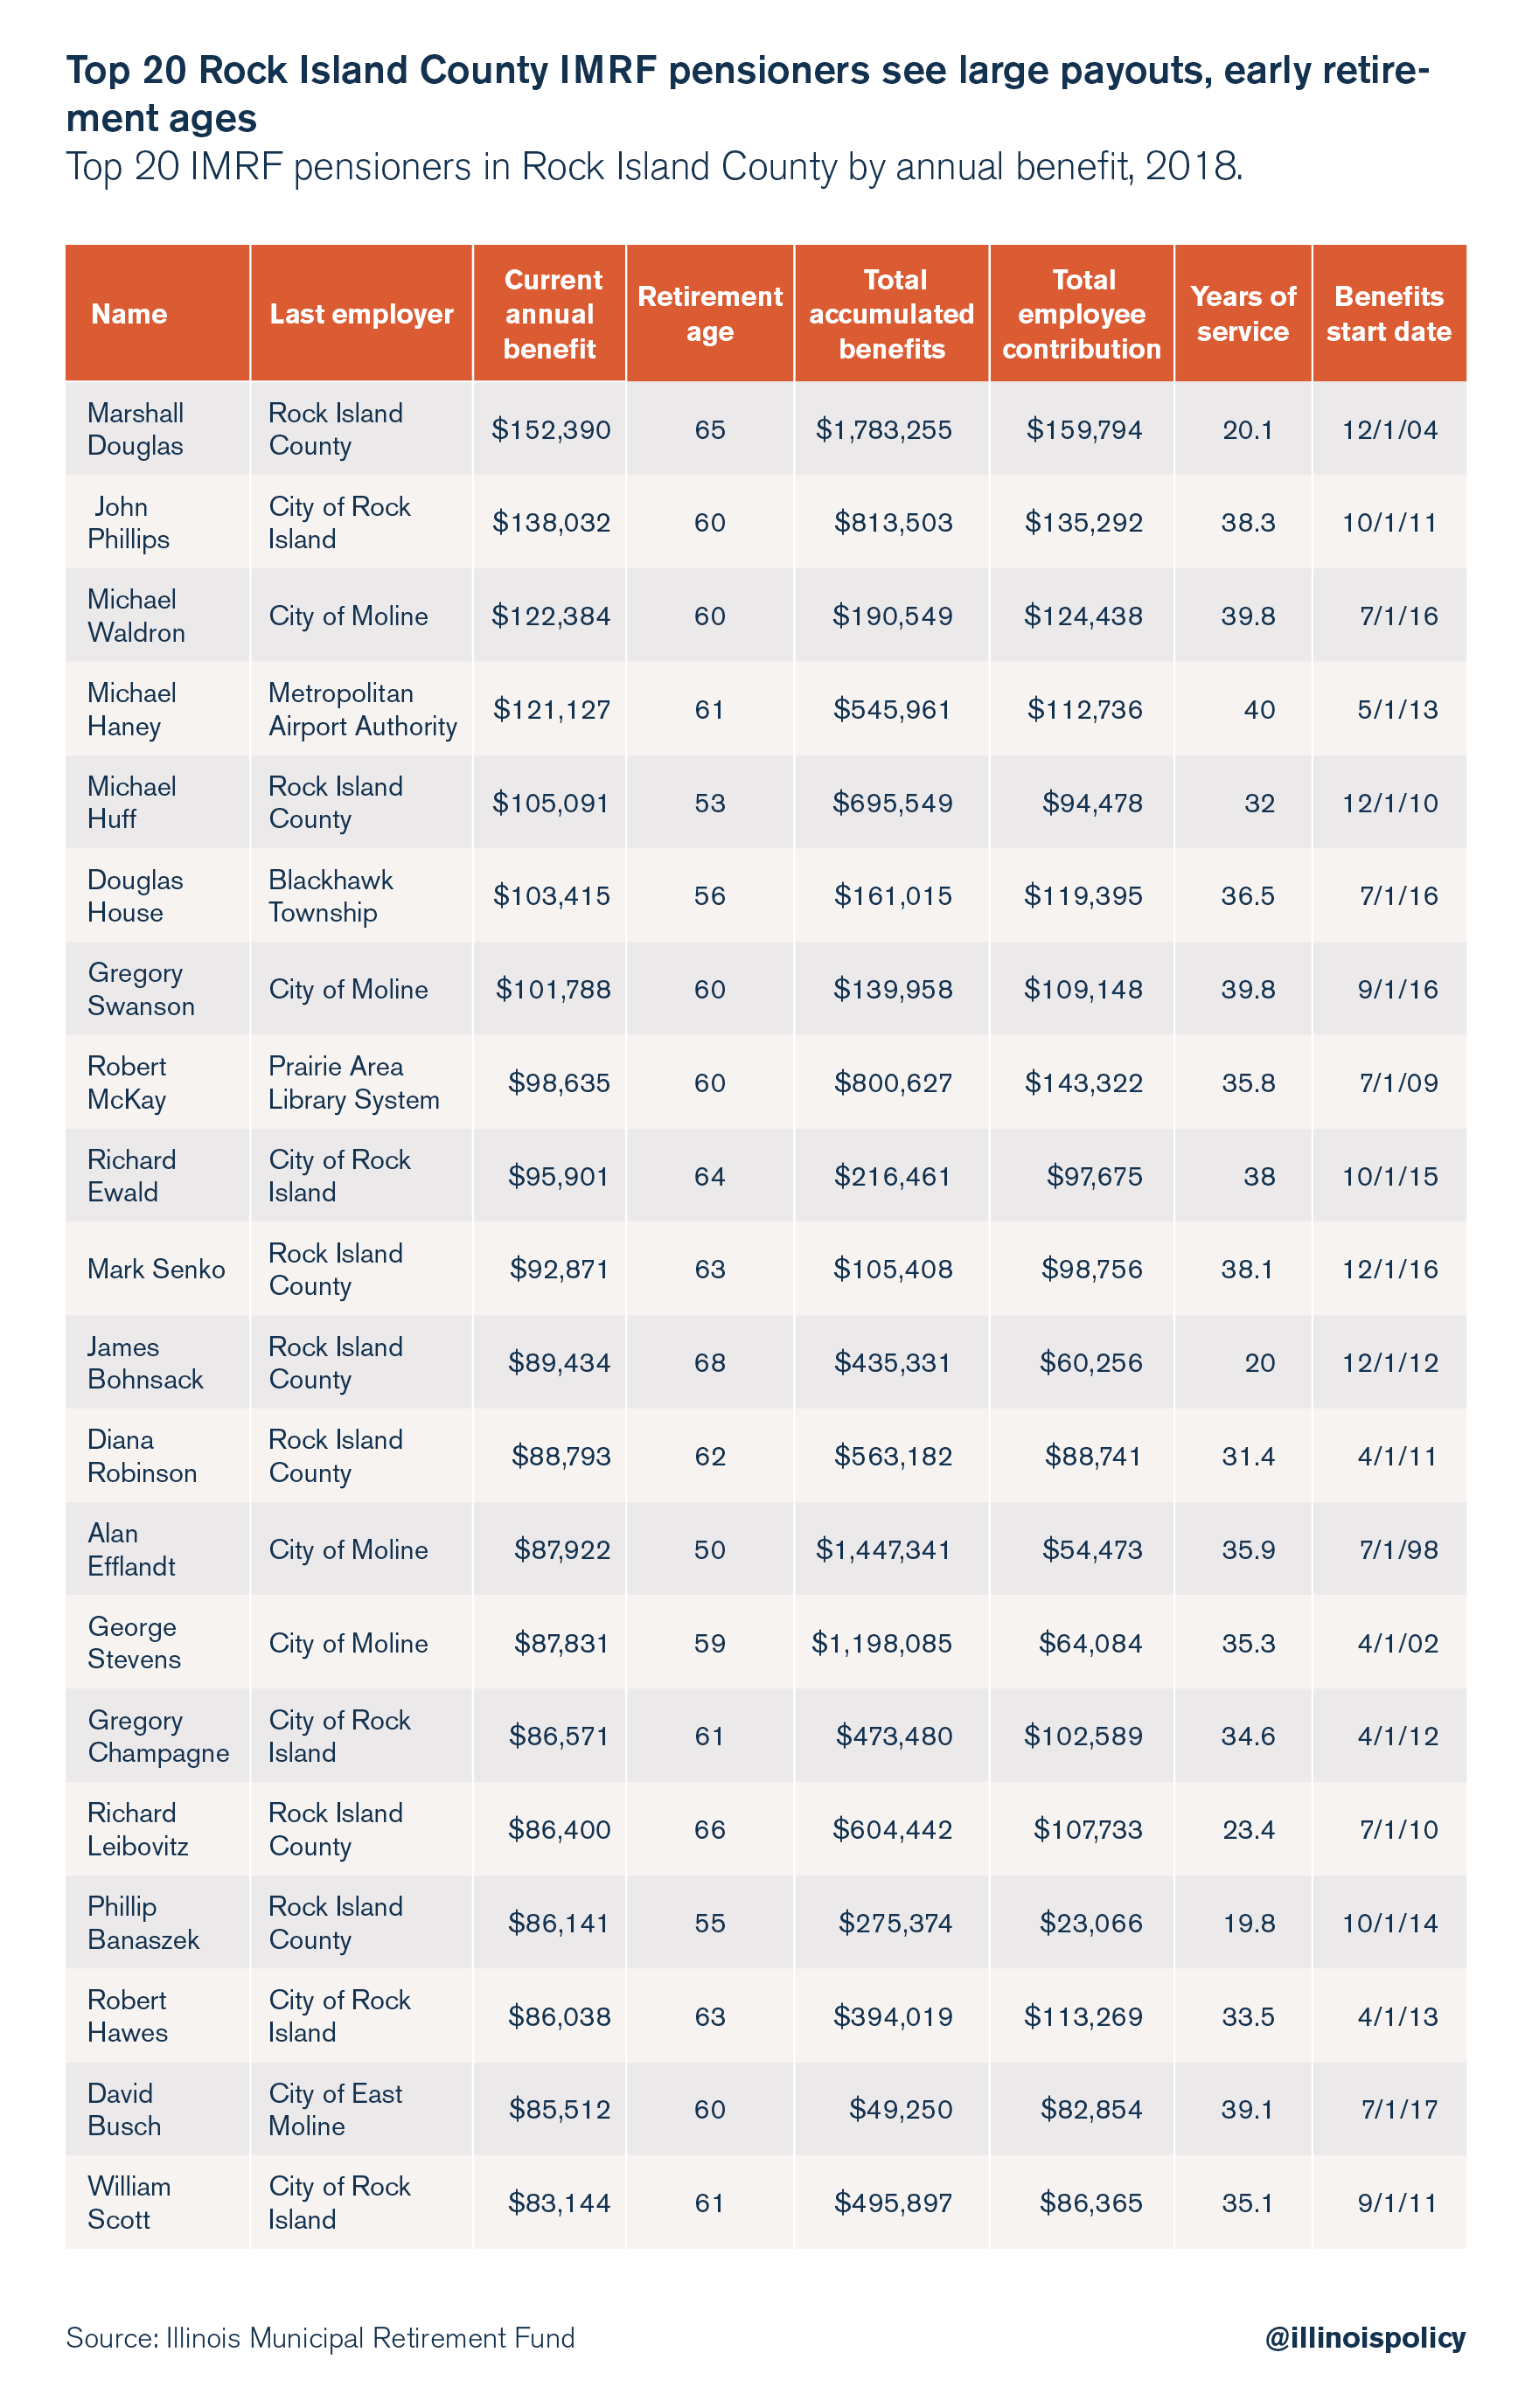 Top 20 Rock Island County IMRF pensioners see large payouts, early retirement ages